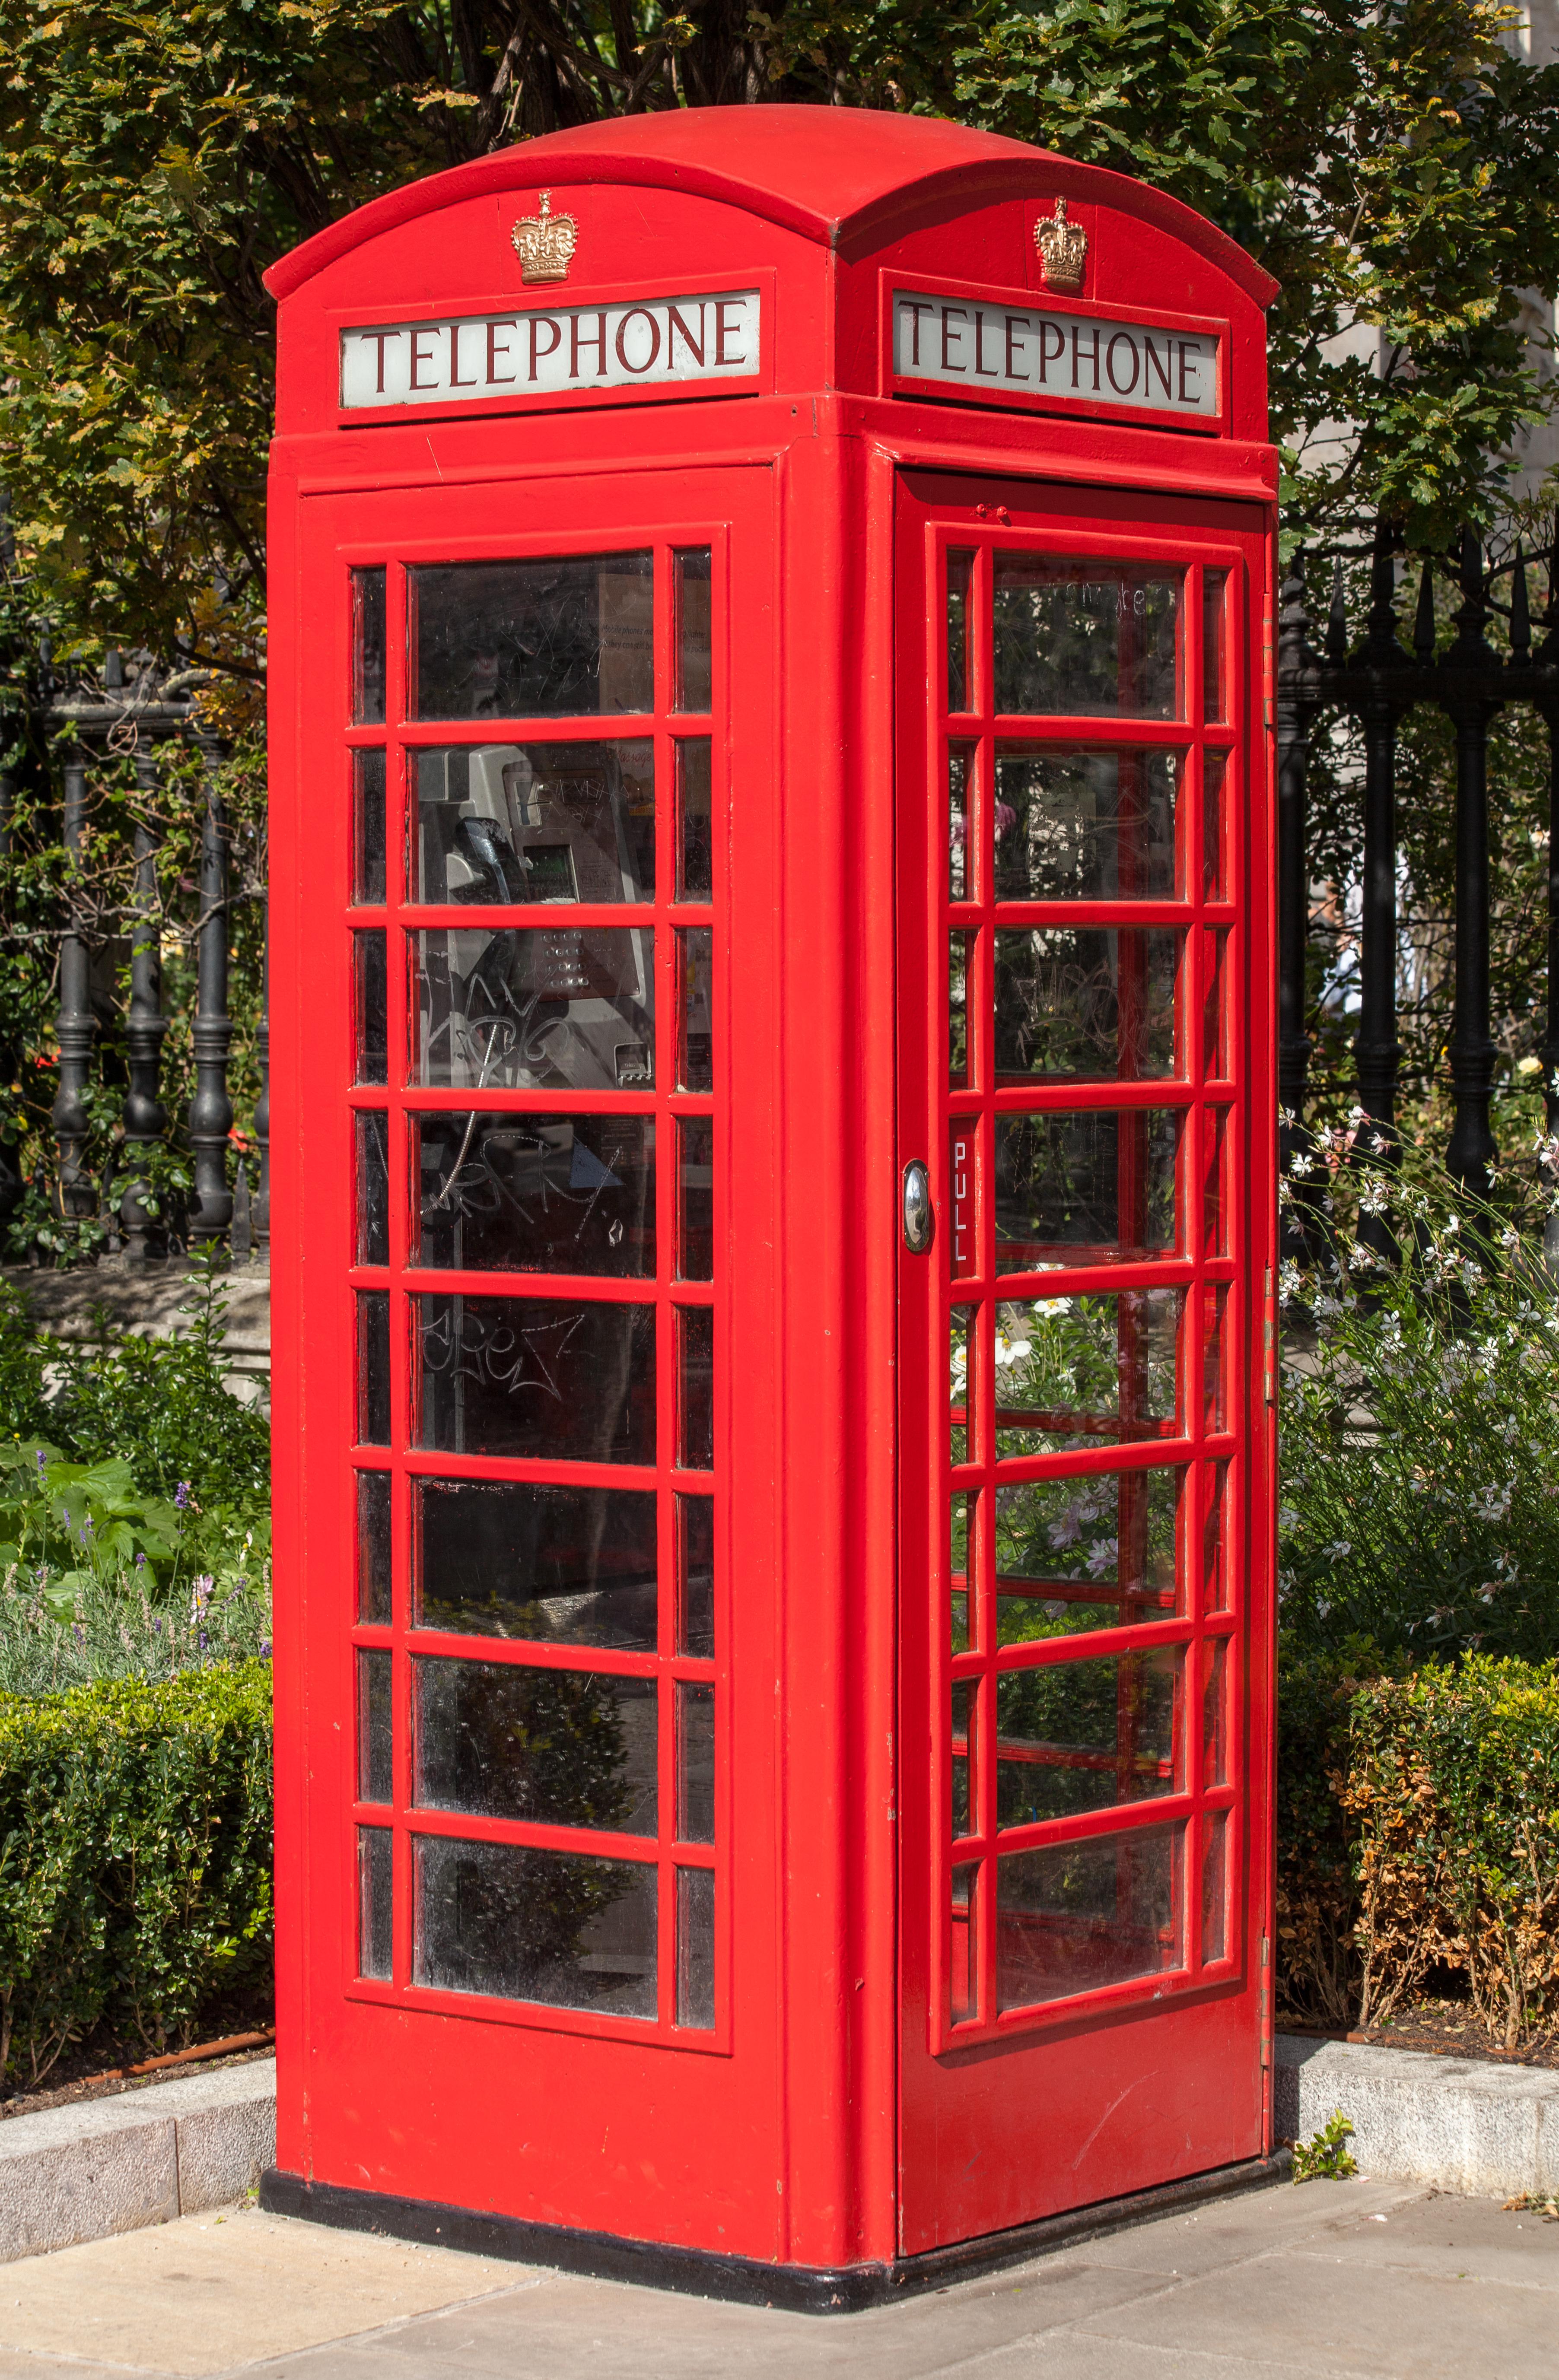 Phone booth in London, FO/ wallpaper collection